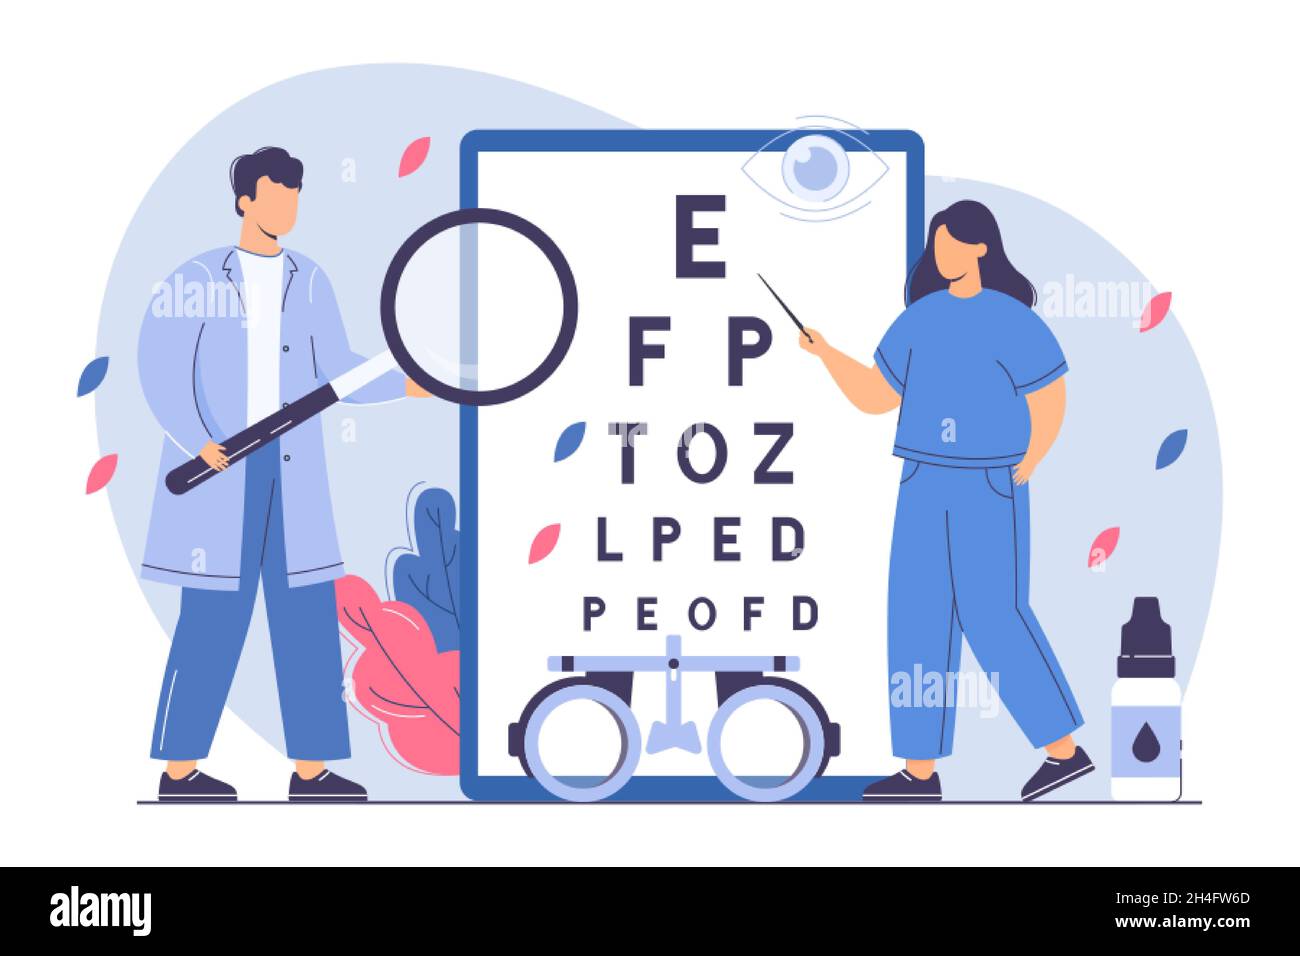 https://c8.alamy.com/comp/2H4FW6D/flat-ophthalmologist-check-eyesight-with-eye-test-chart-and-eyeglasses-woman-oculist-with-pointer-measure-visual-acuity-doctor-diagnose-ophthalmic-problem-in-hospital-ophthalmic-exam-concept-2H4FW6D.jpg